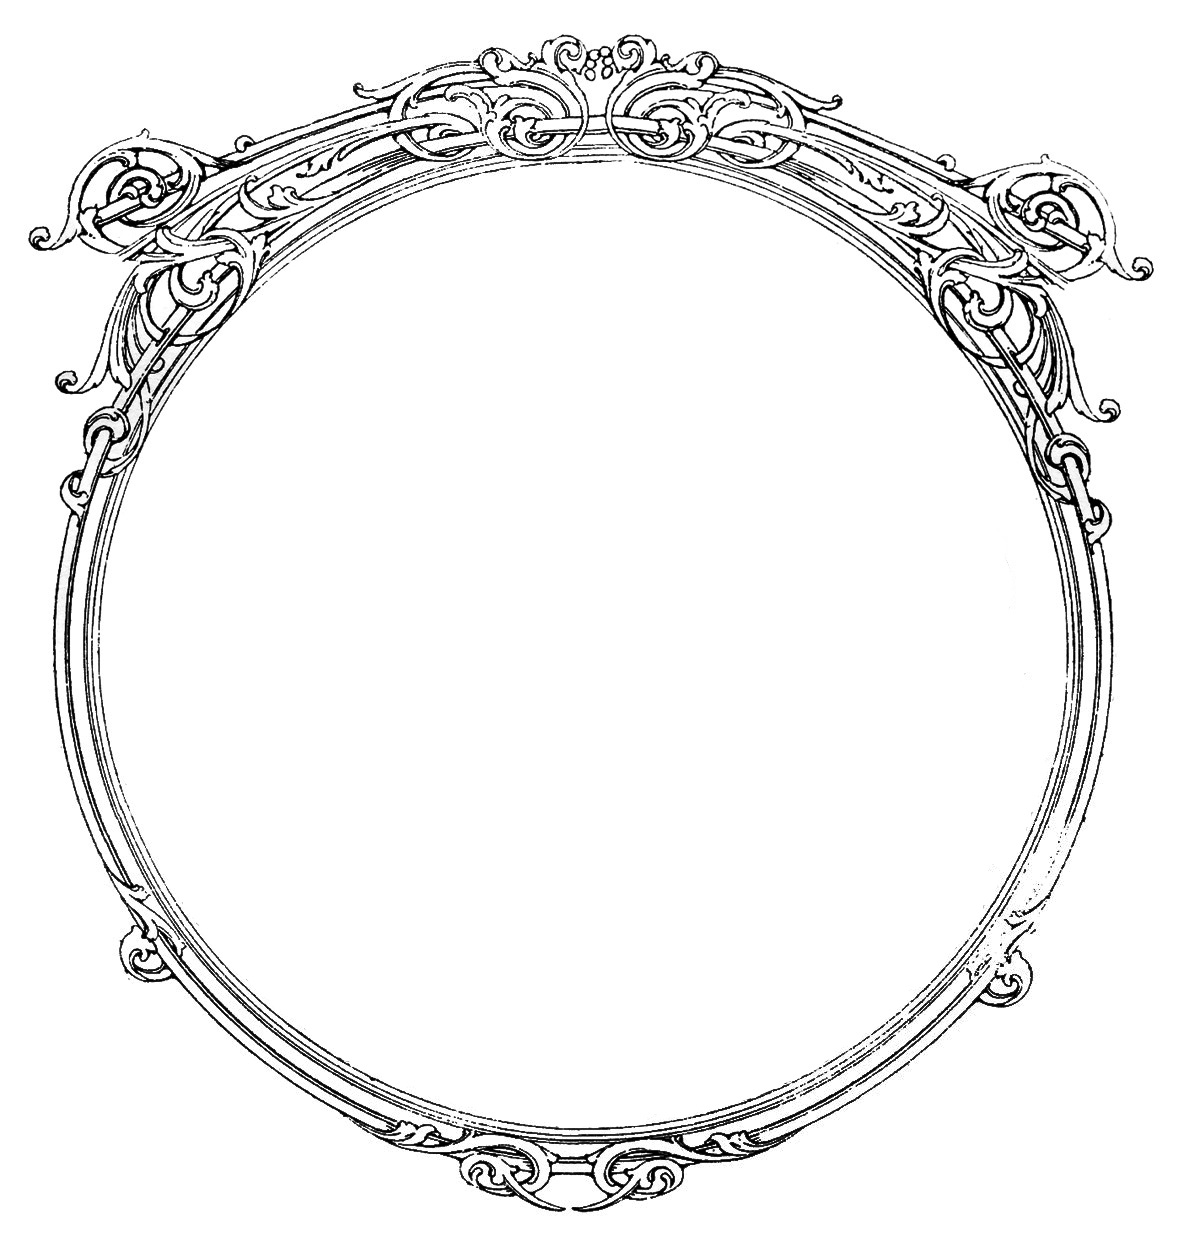 Vintage Images   Round Ornate Frames   The Graphics Fairy